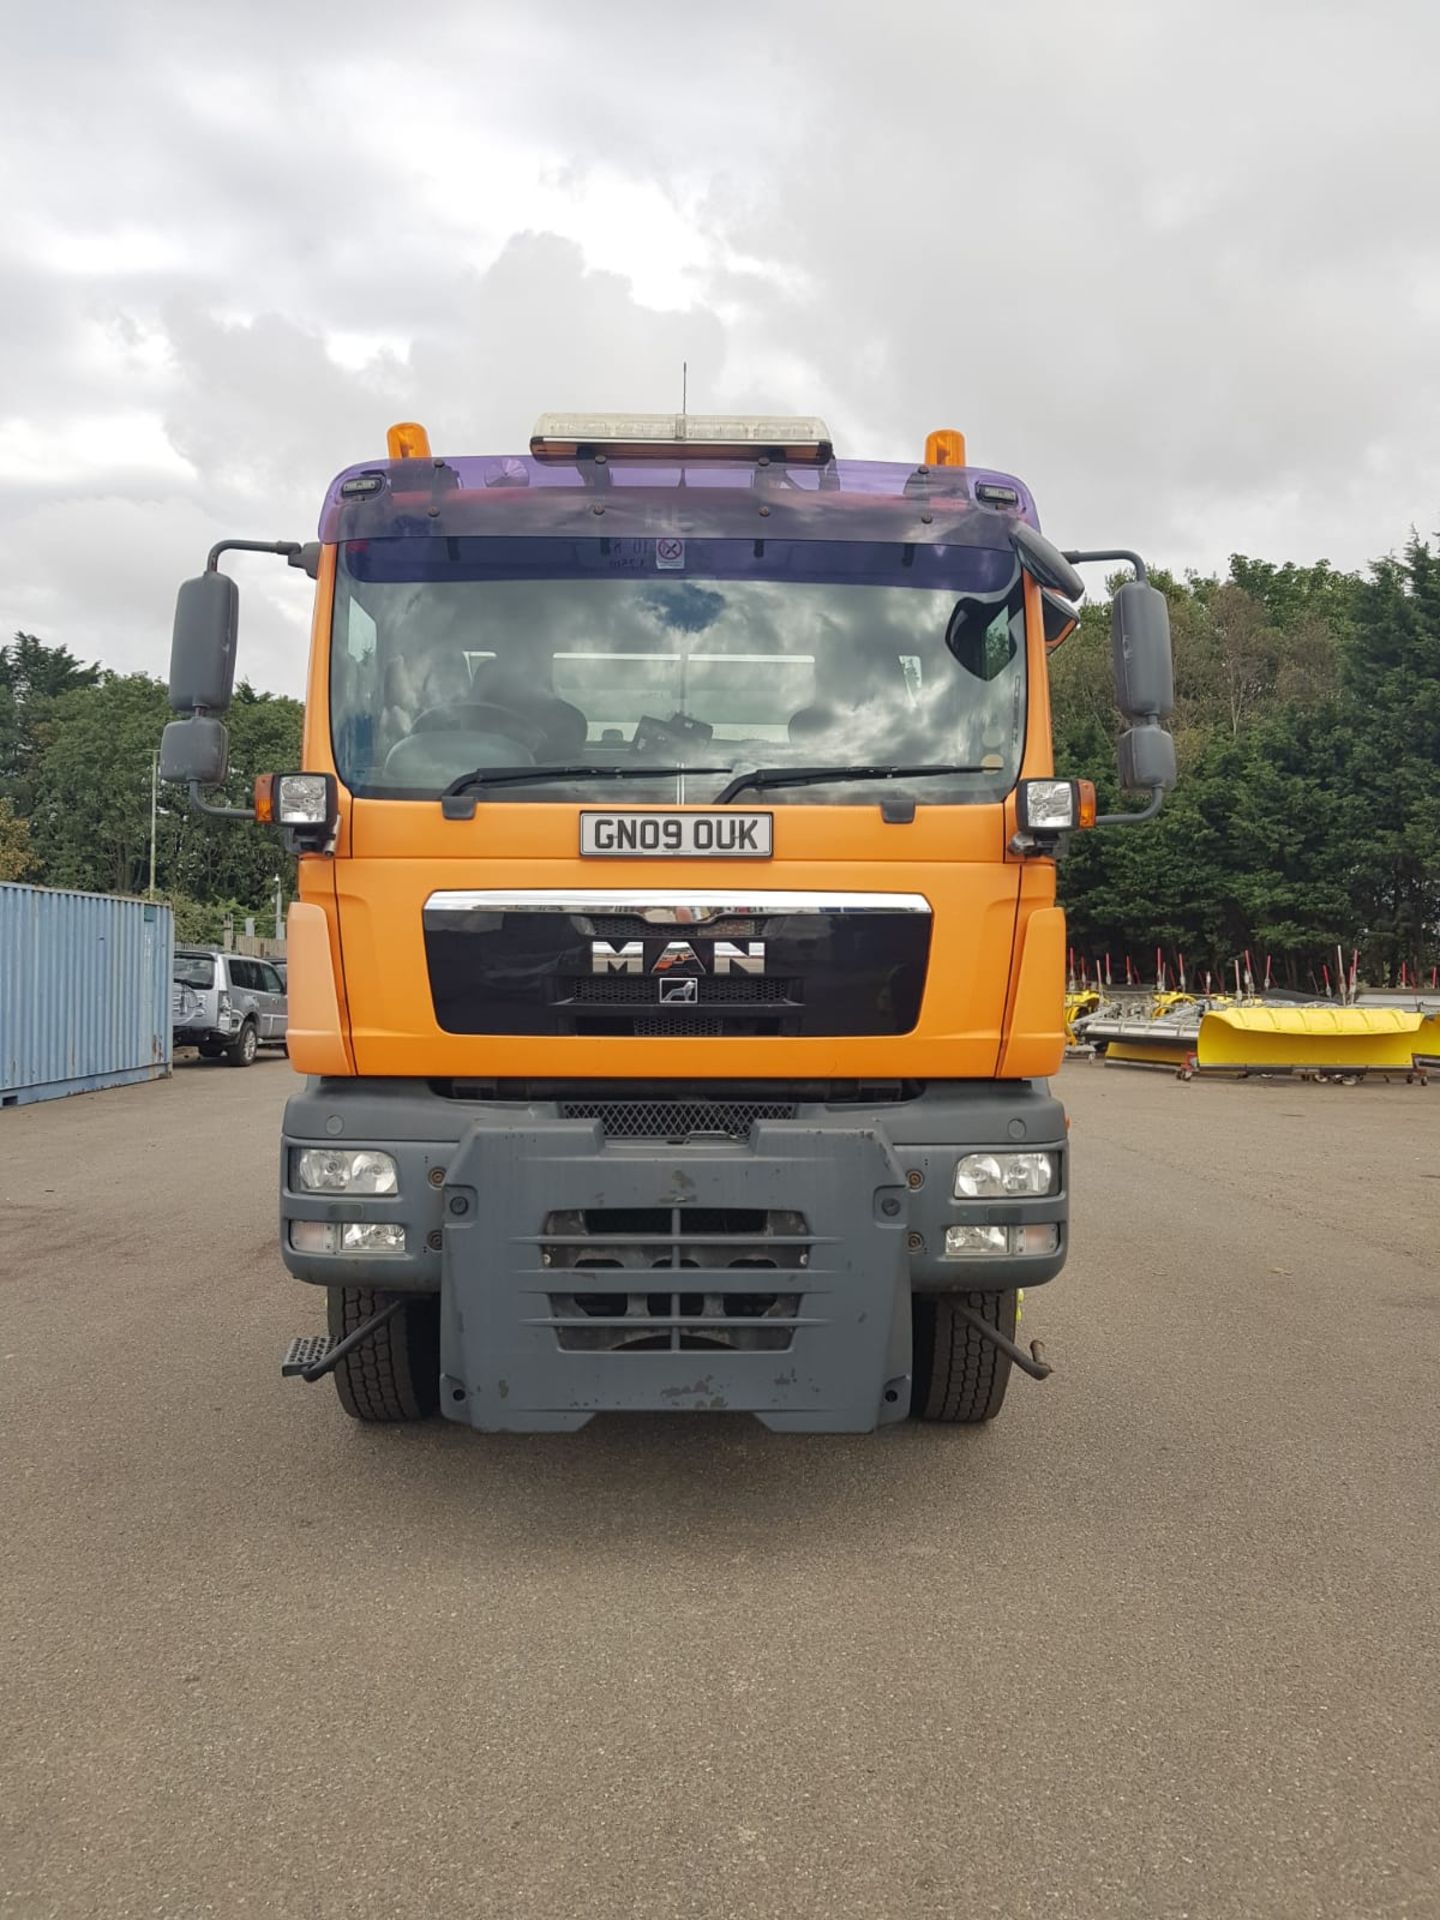 MAN 2009 (reg GN09 OUK) TGM 18.280 4x4 with ROMAQUIP pre-wet gritter mount. - Image 8 of 23